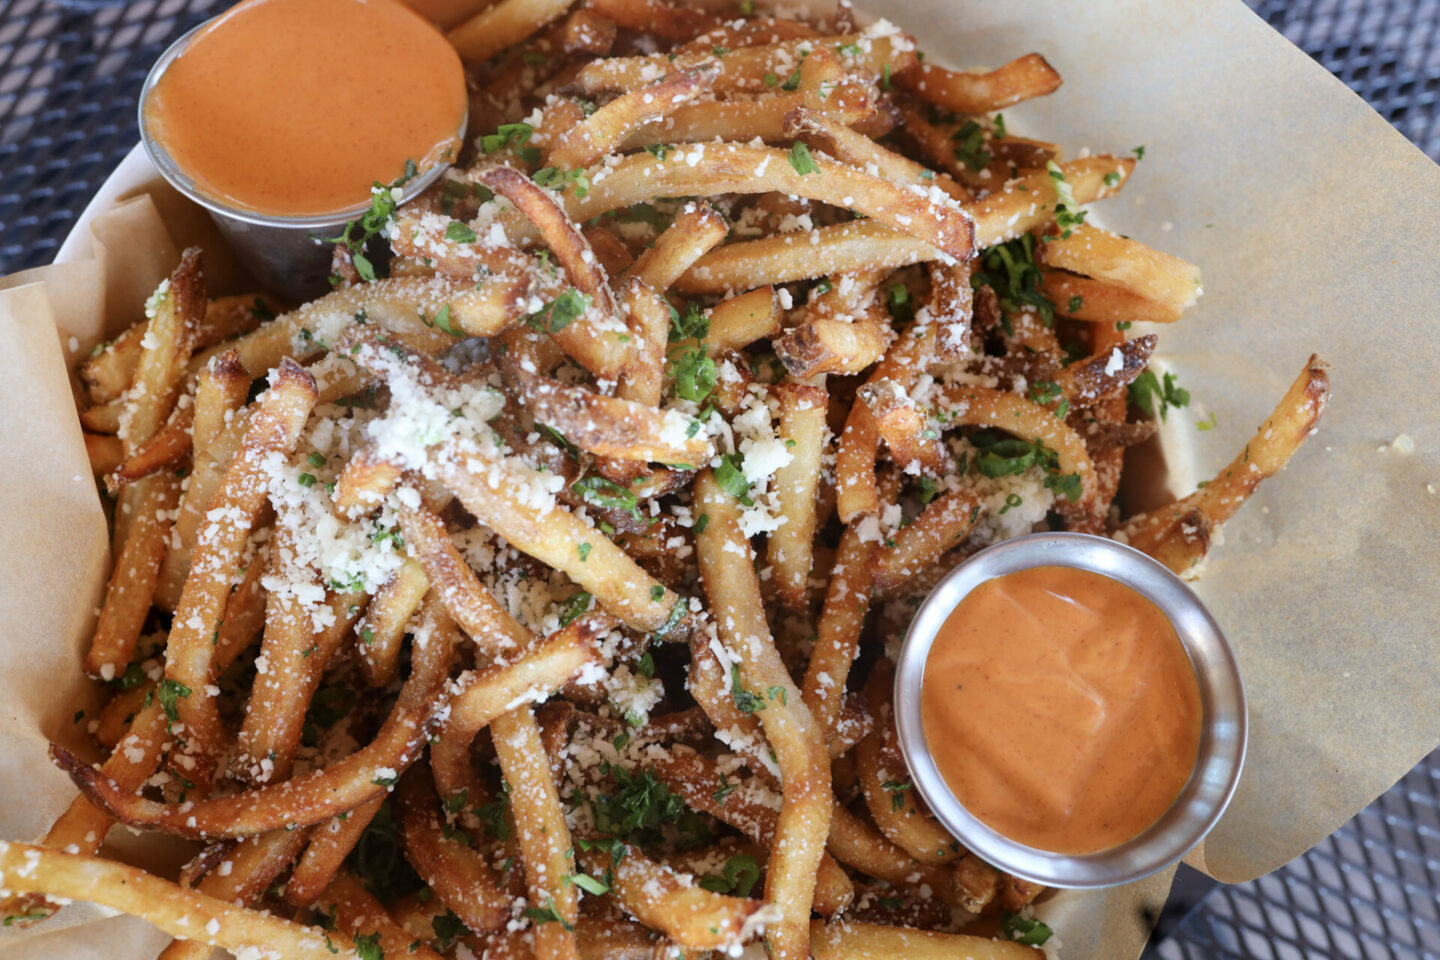 Truffle fries at Belle Fiore winery in Ashland Oregon